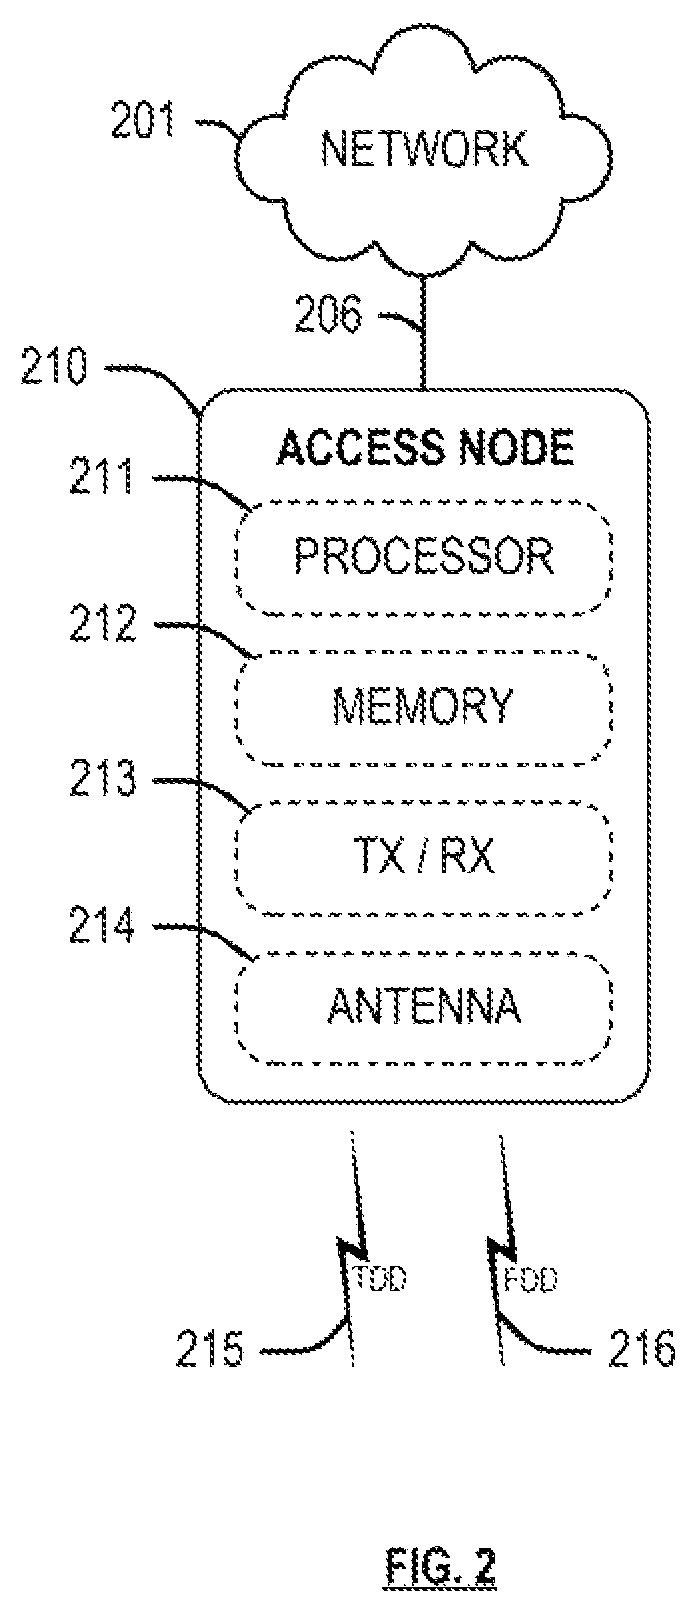 Selecting a primary carrier for a high power class wireless device